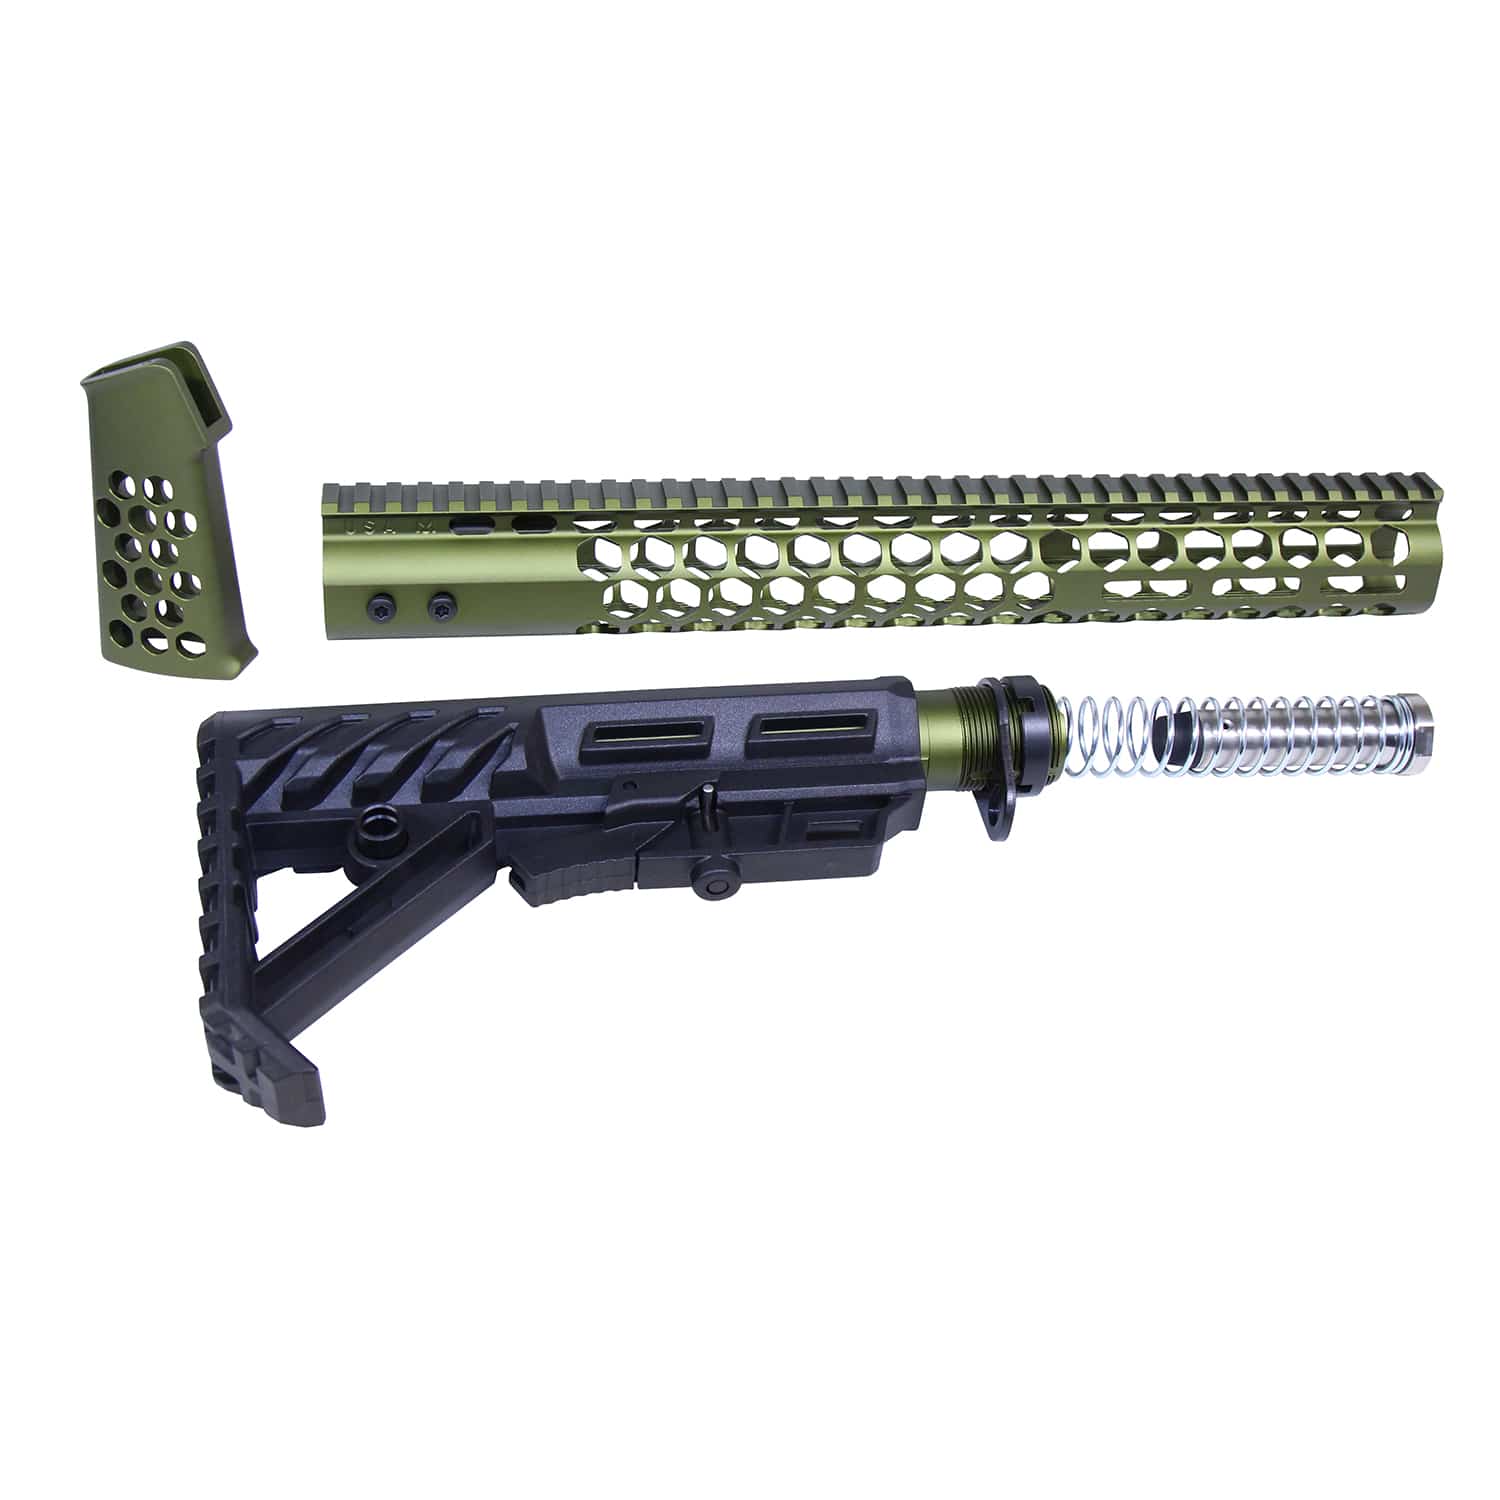 AR-15 Honeycomb Series Complete Rifle Furniture Set in Anodized Green